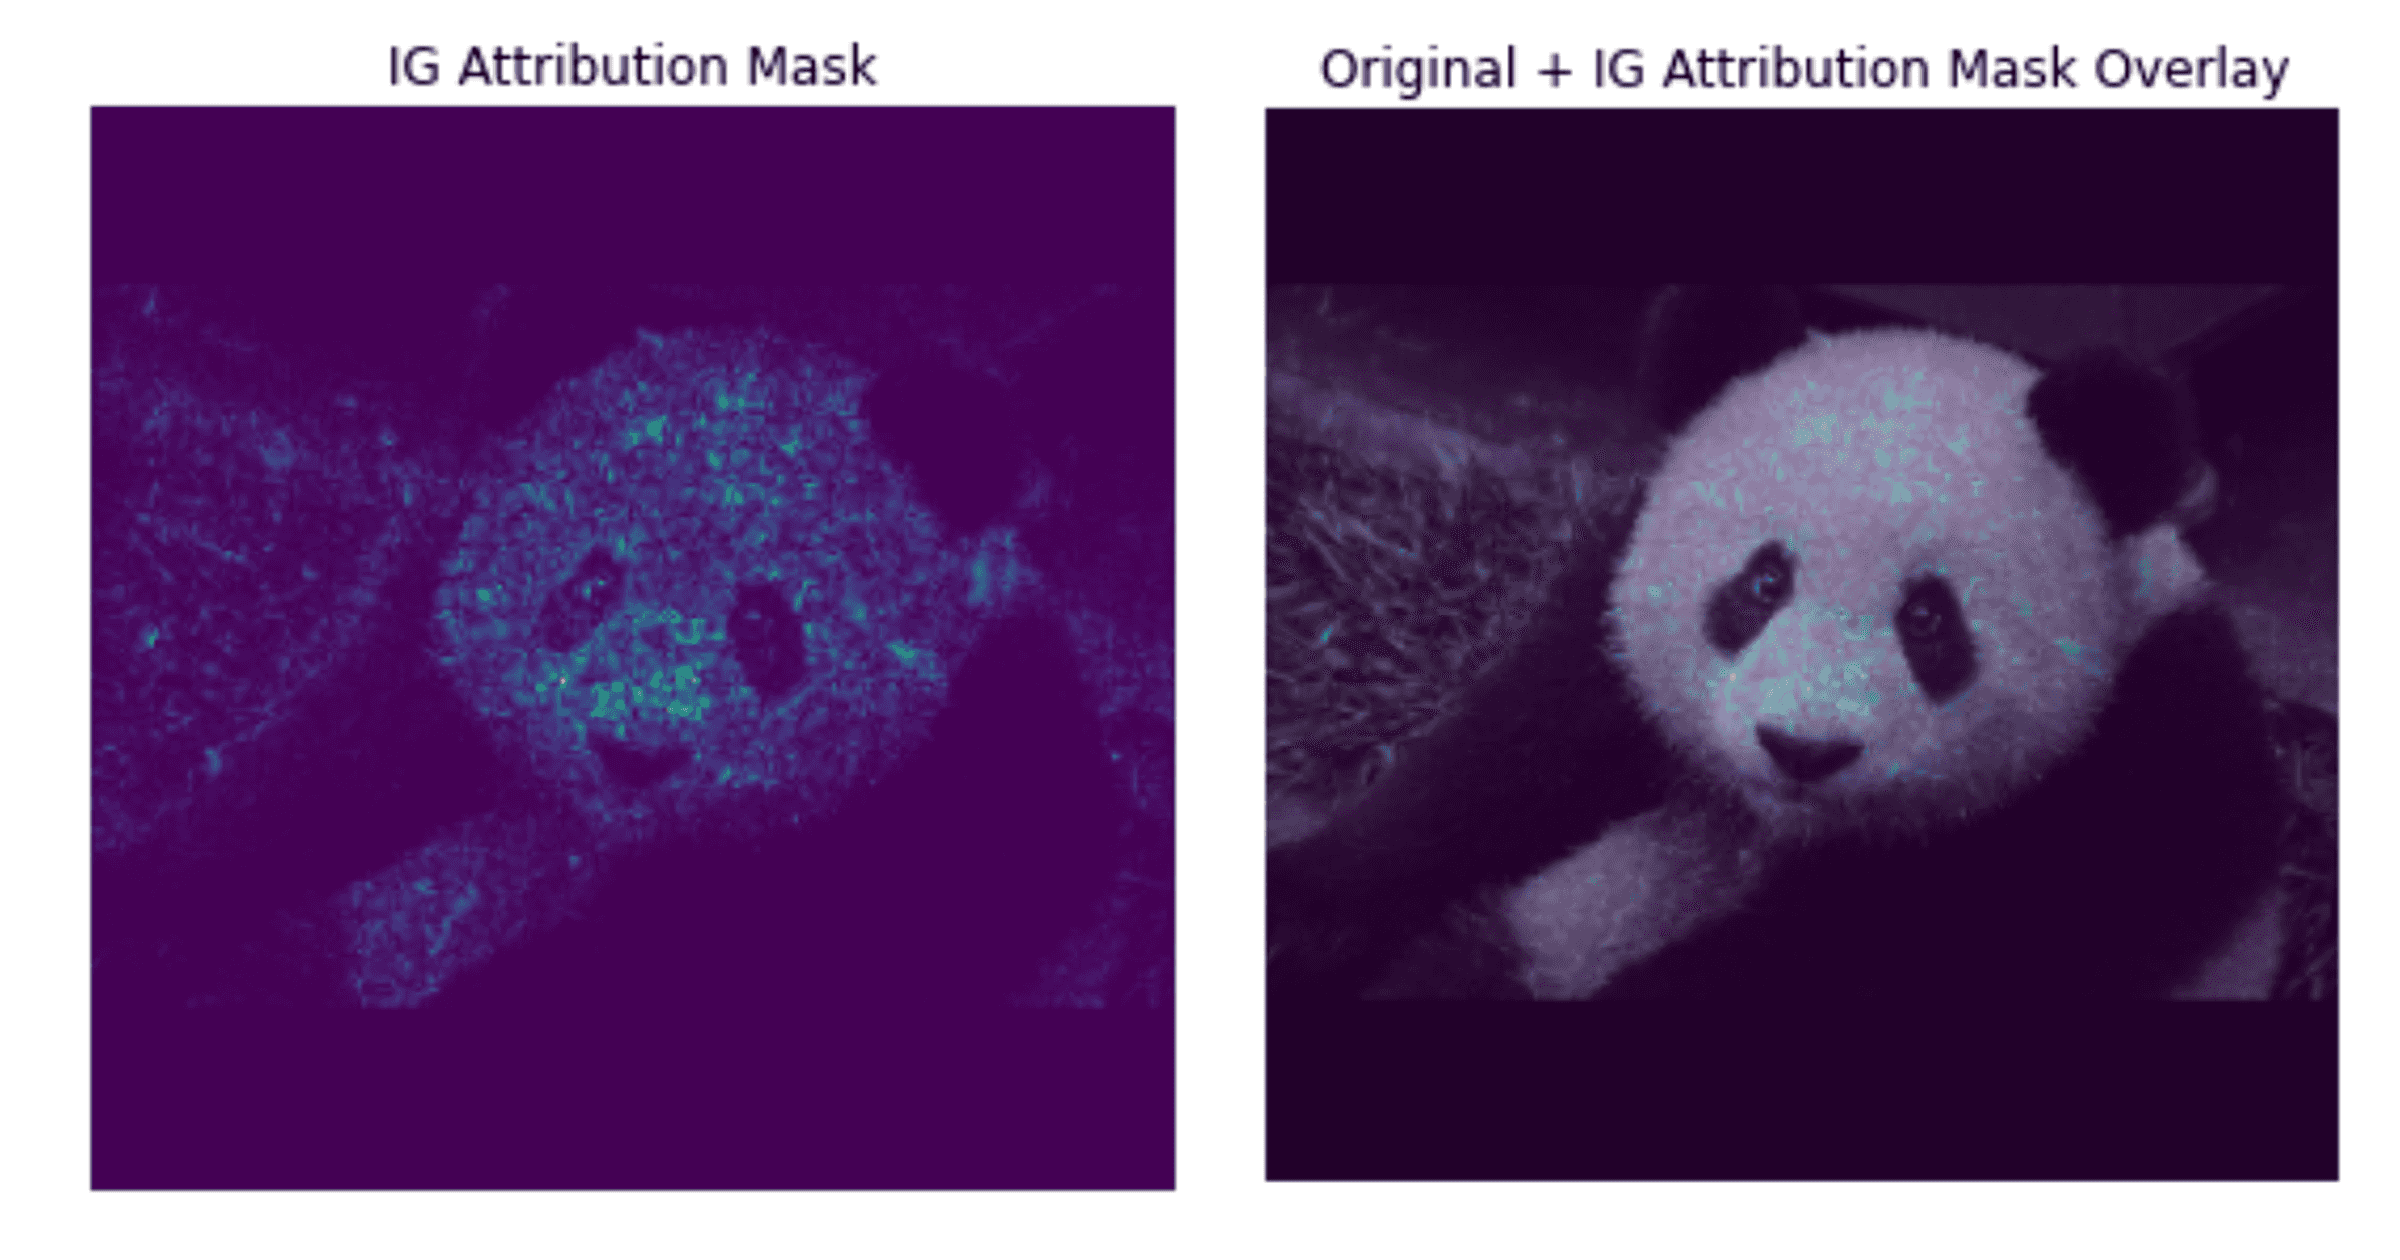 Integrated gradient attribution mask and overlay on input image